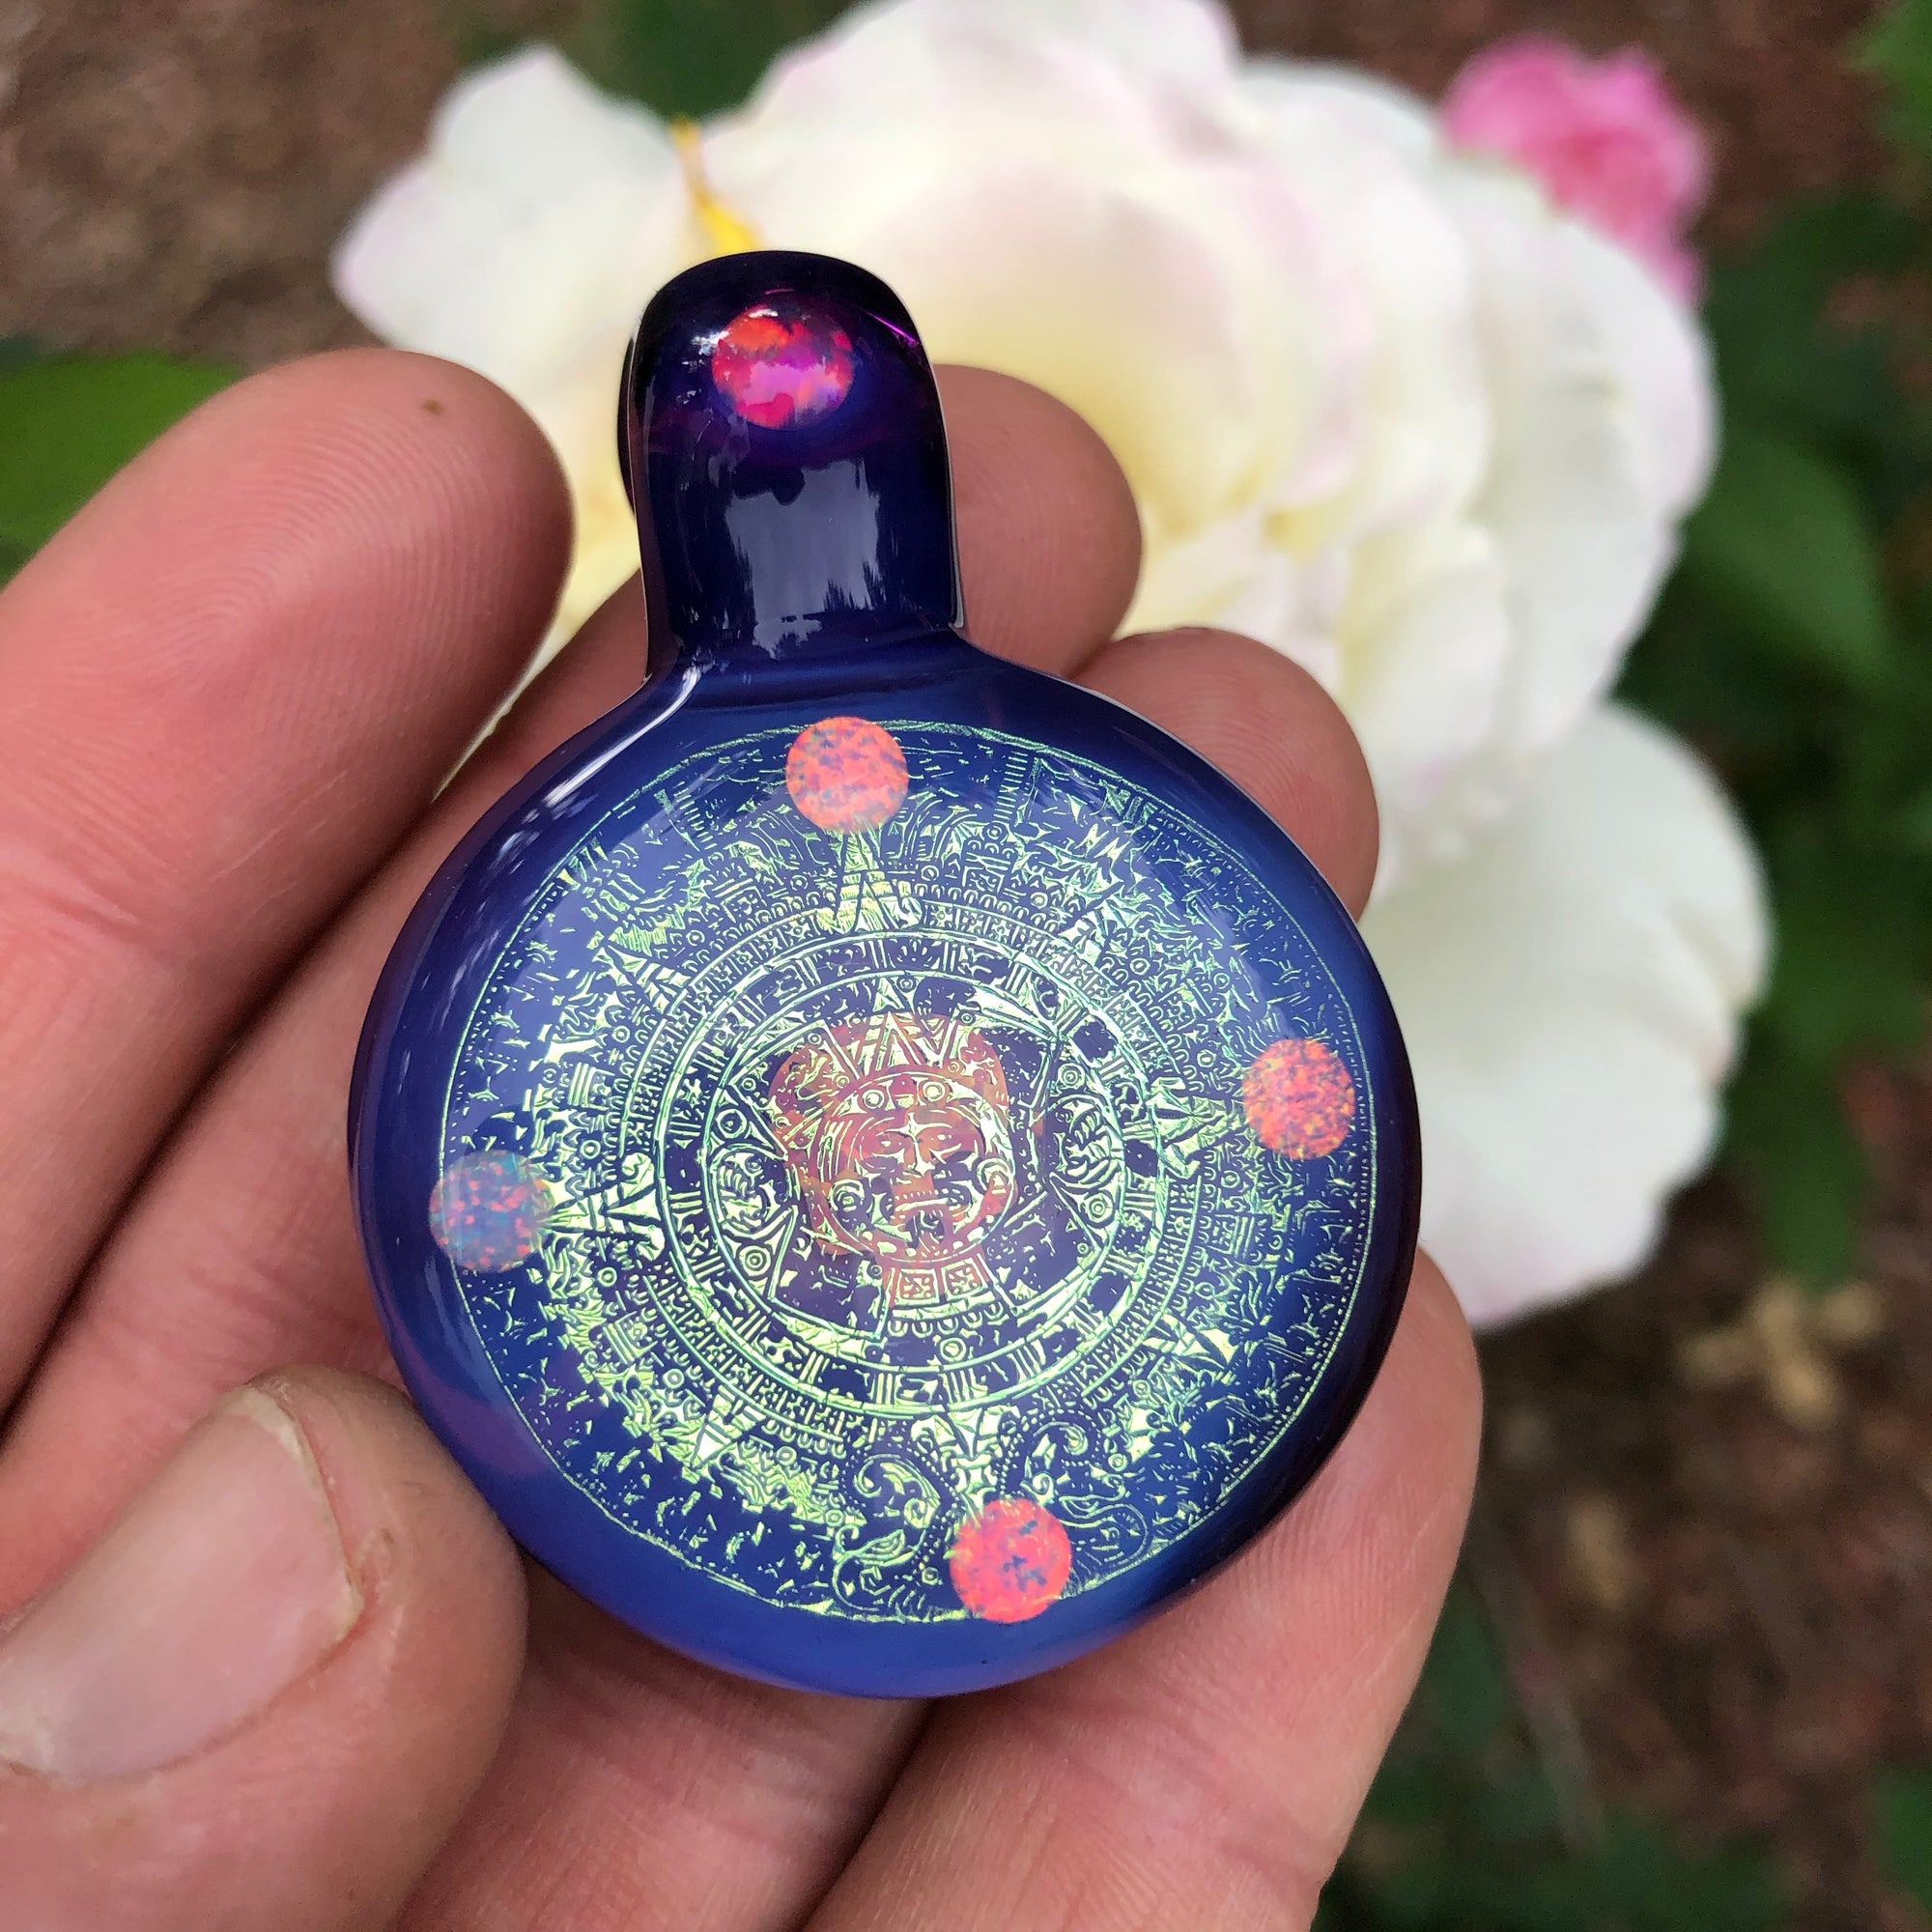 A purple dichroic hollagram pendant is held outside in front of a white flower, the pendant has  six inlaid opals, four around the face of the pendant and one on the bail, there is also a skull opal in the center of the pendant face.